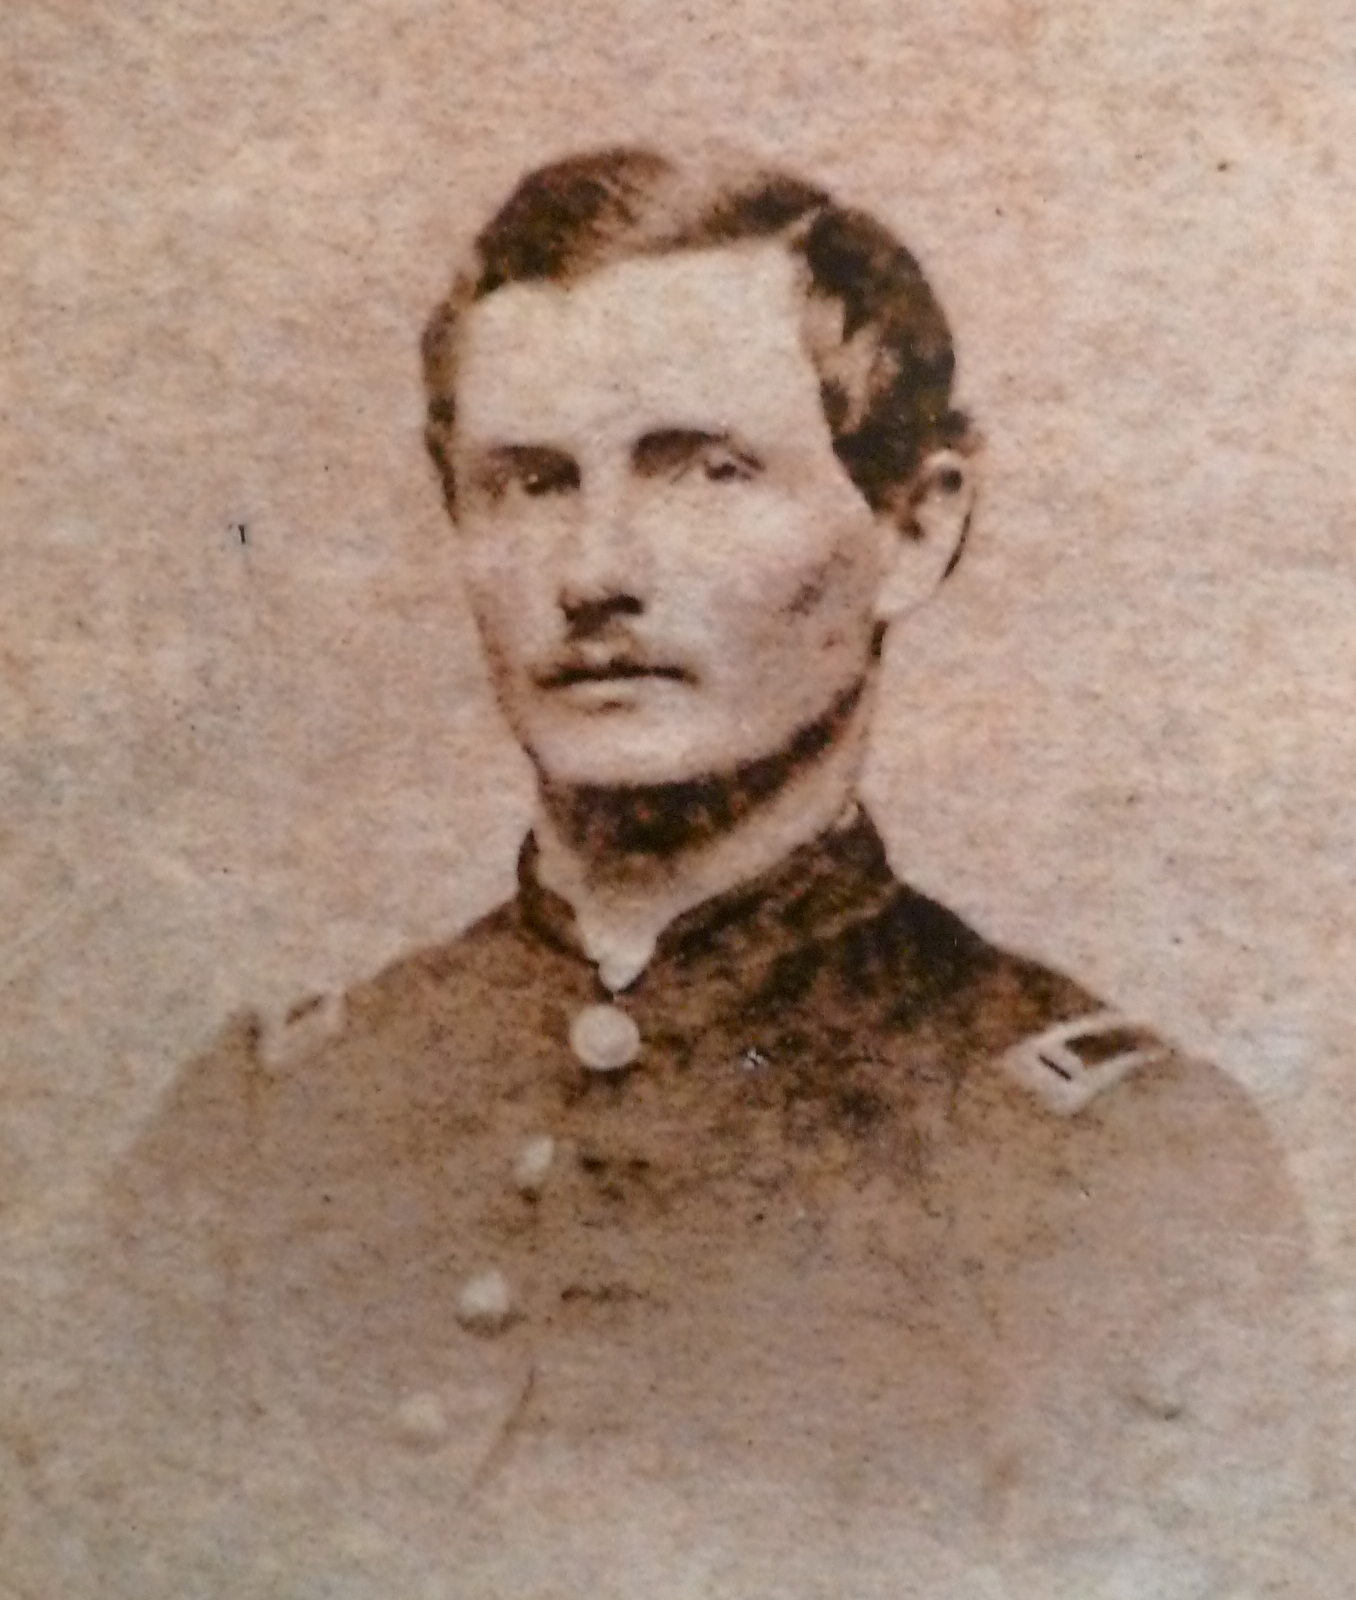 Photograph of Charles Barton Sanders courtesy of the U.S. Army Military History Institute